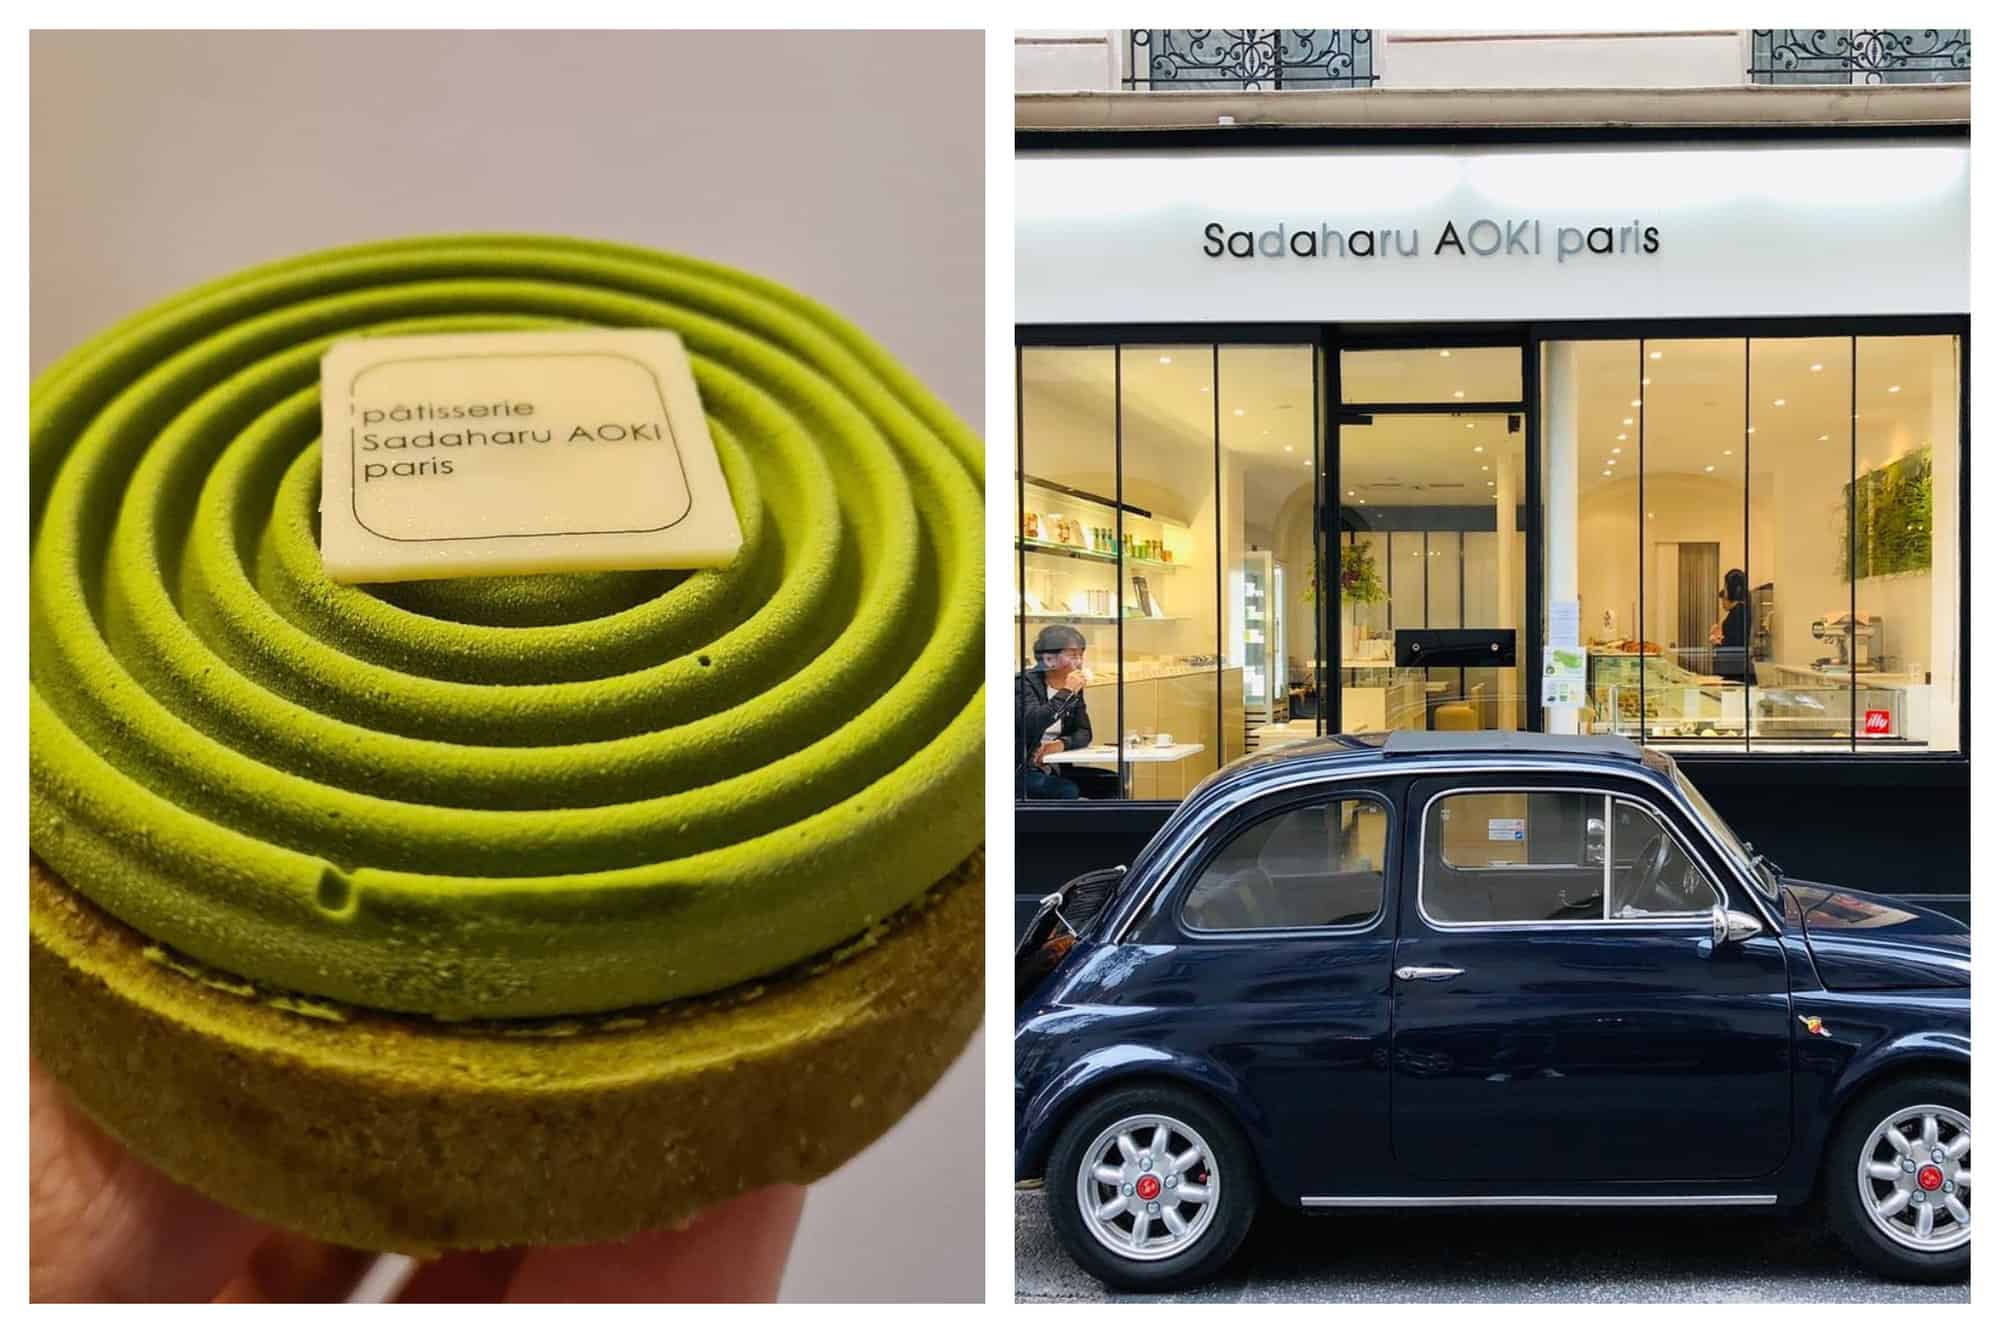 A montage of 2 pictures from Parisian Patisserie Sadaharu Aoki Paris. Left: A picture of Patisserie Sadaharu Aoki’s famous Tarte au Caramel Salé Matcha. This tart has a bright green top and brown crusts. Right: A picture of Sadaharu Aoki’s store front with the head chef’s black vintage Volkswagen car parked in front and the head chef sitting inside his store, drinking a cup of tea. 2 ladies are behind the counter full of pastries.